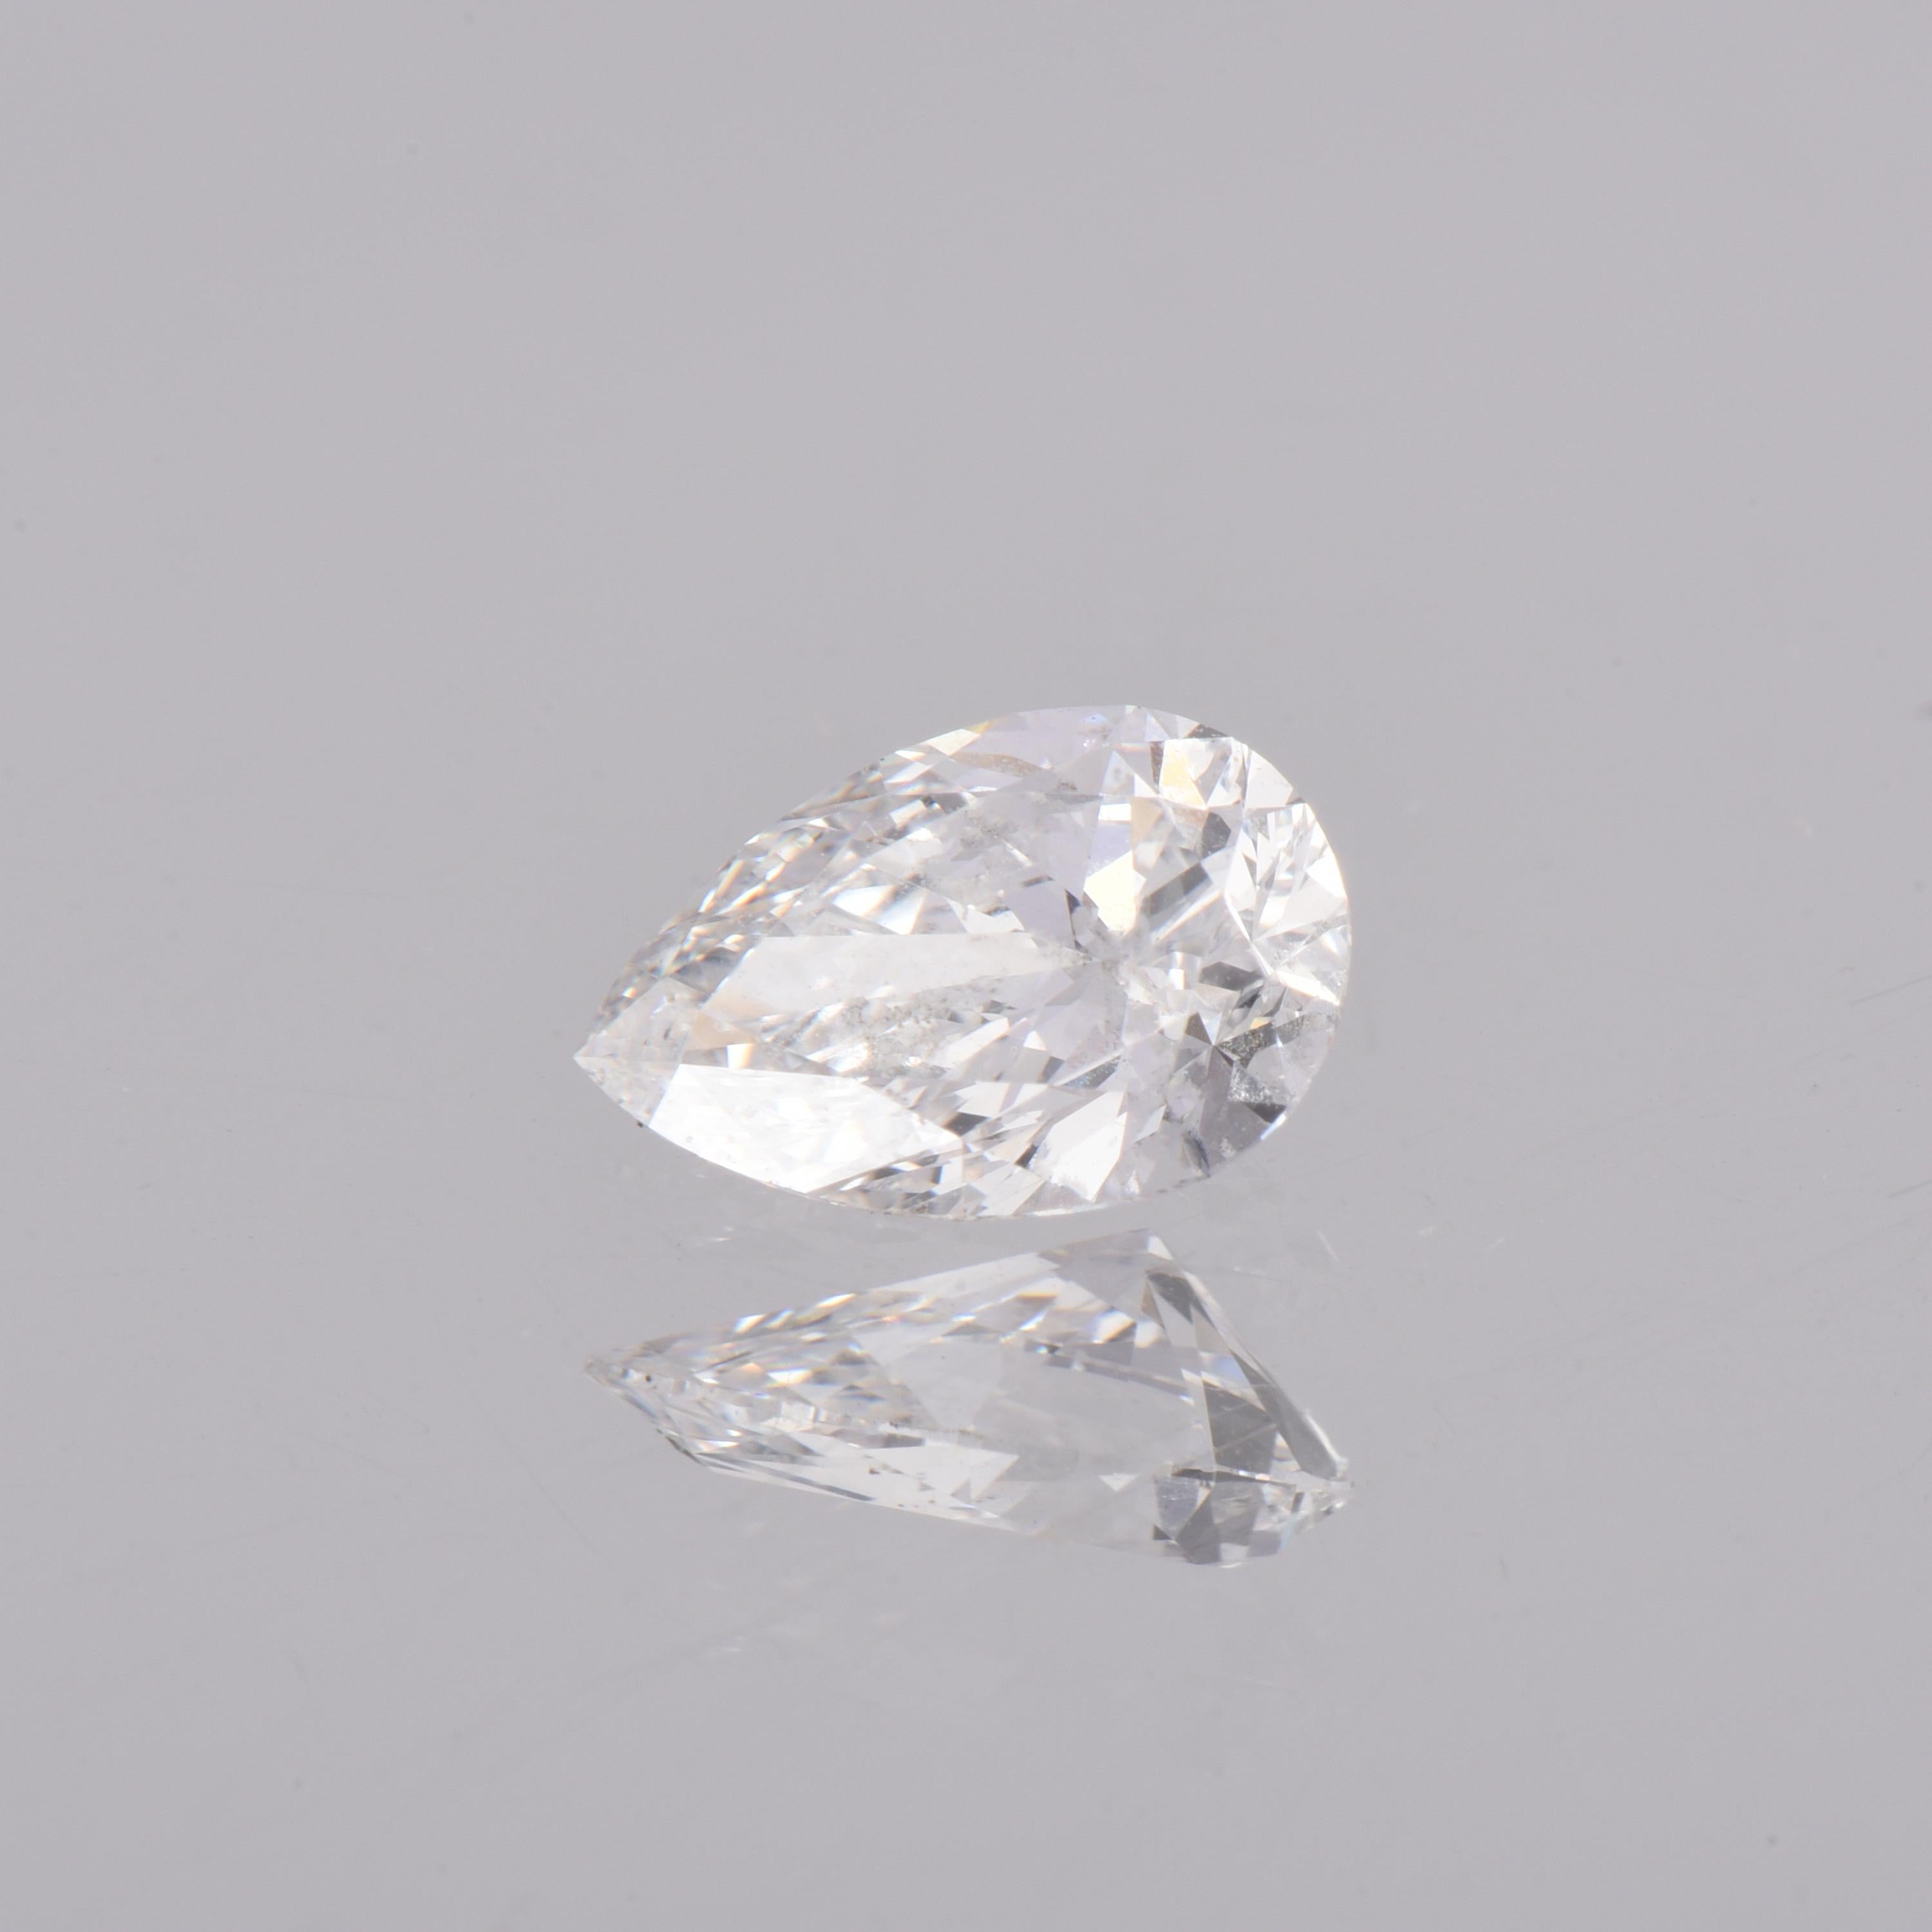 GIA certified, 0.50 carat colorless diamond – certified as E color, VS1 clarity by GIA, this diamond exhibits ideal brilliance, excellent polish and very good symmetry. Measuring 6.79-4.48 x 2.75 mm, this diamond can be set into an engagement ring